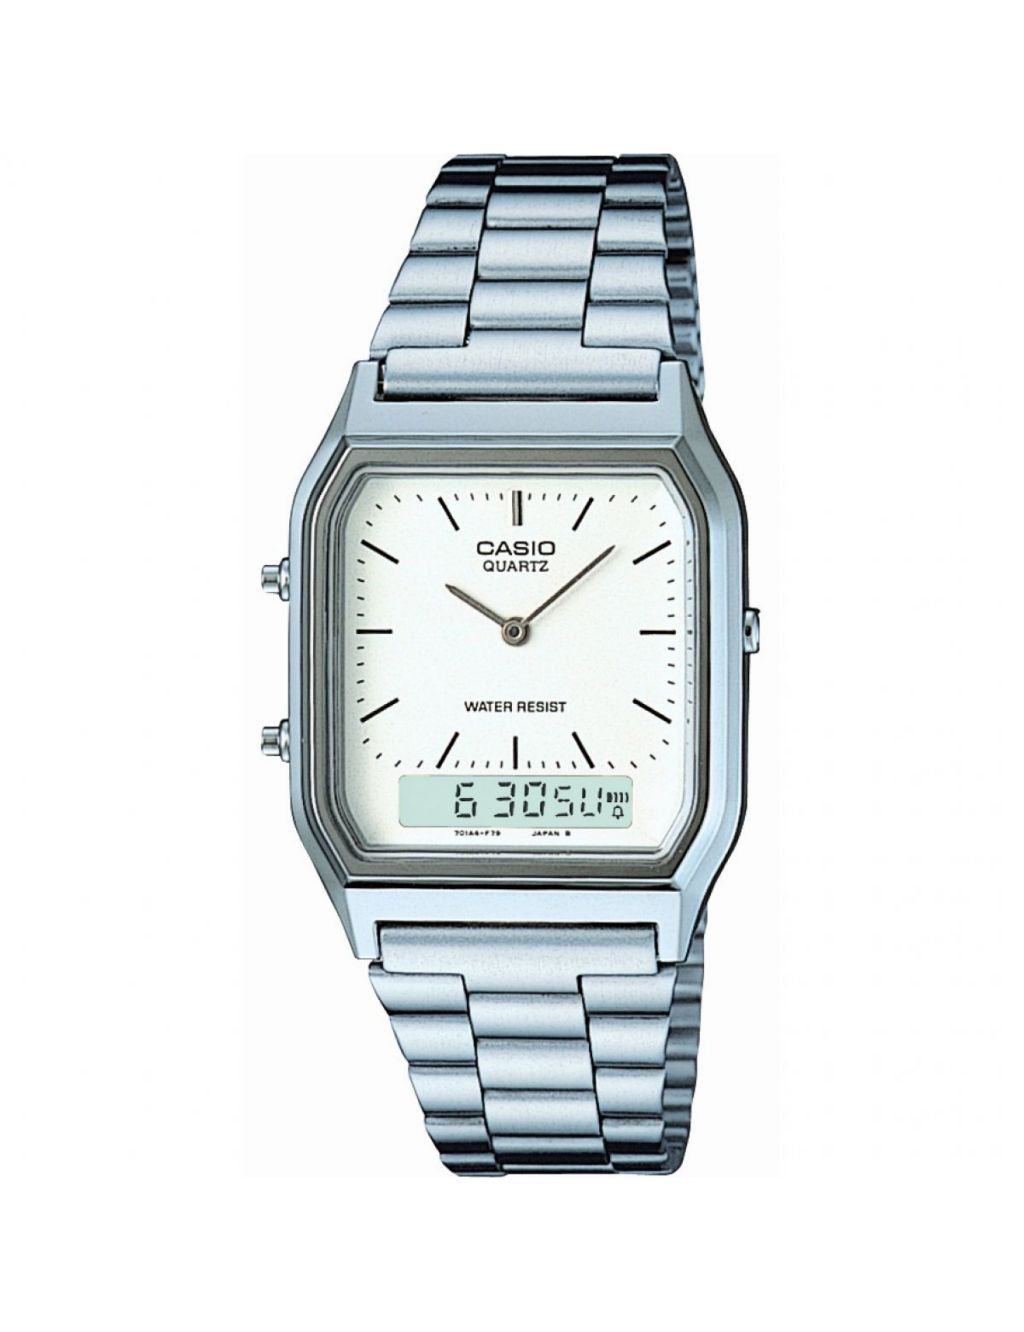 Casio Stainless Steel Chronograph Watch image 1